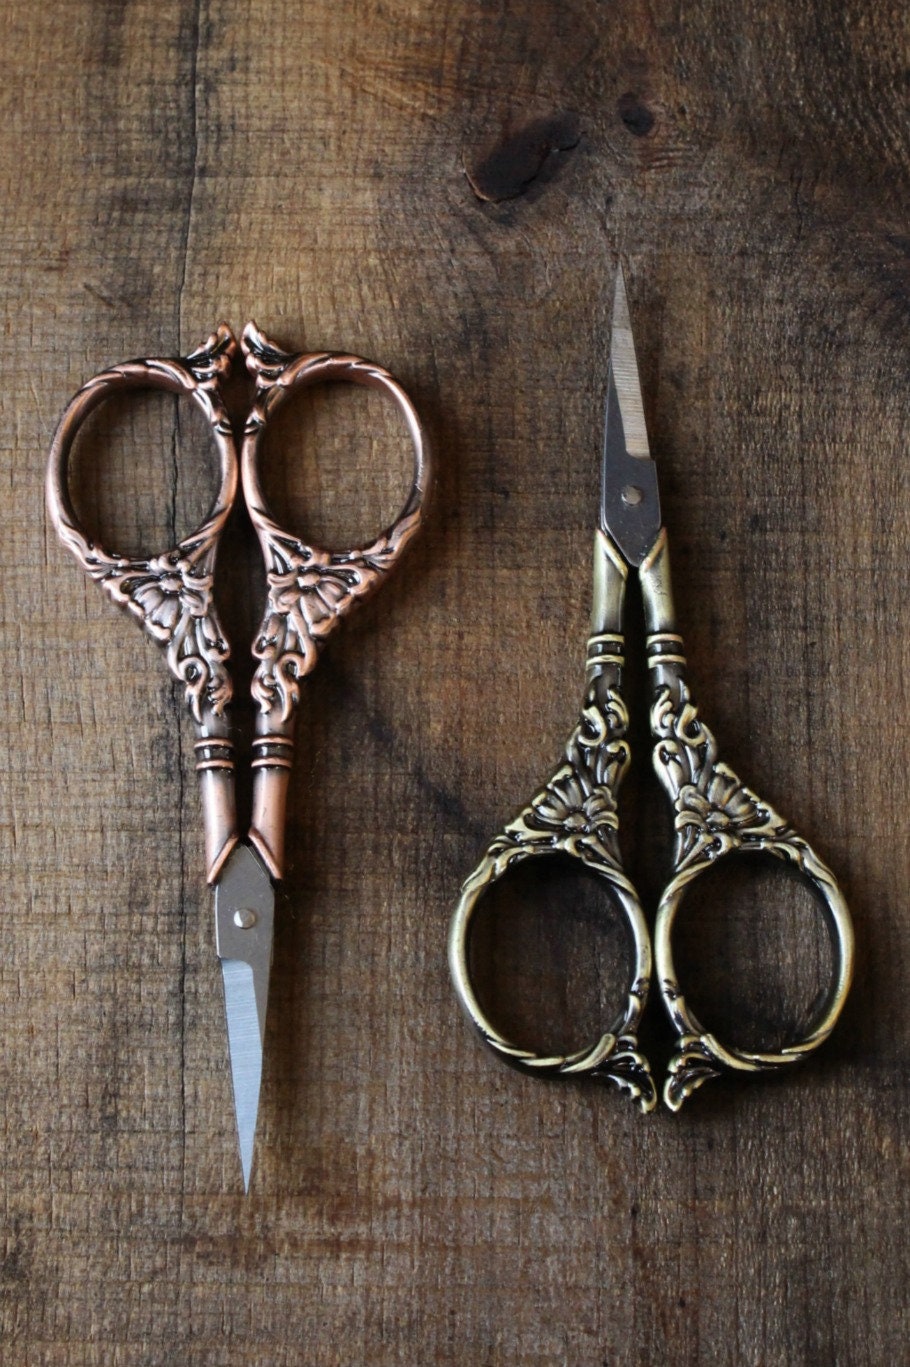 Botanical Garden embroidery scissors with stainless steel blades in antique gold and antique copper